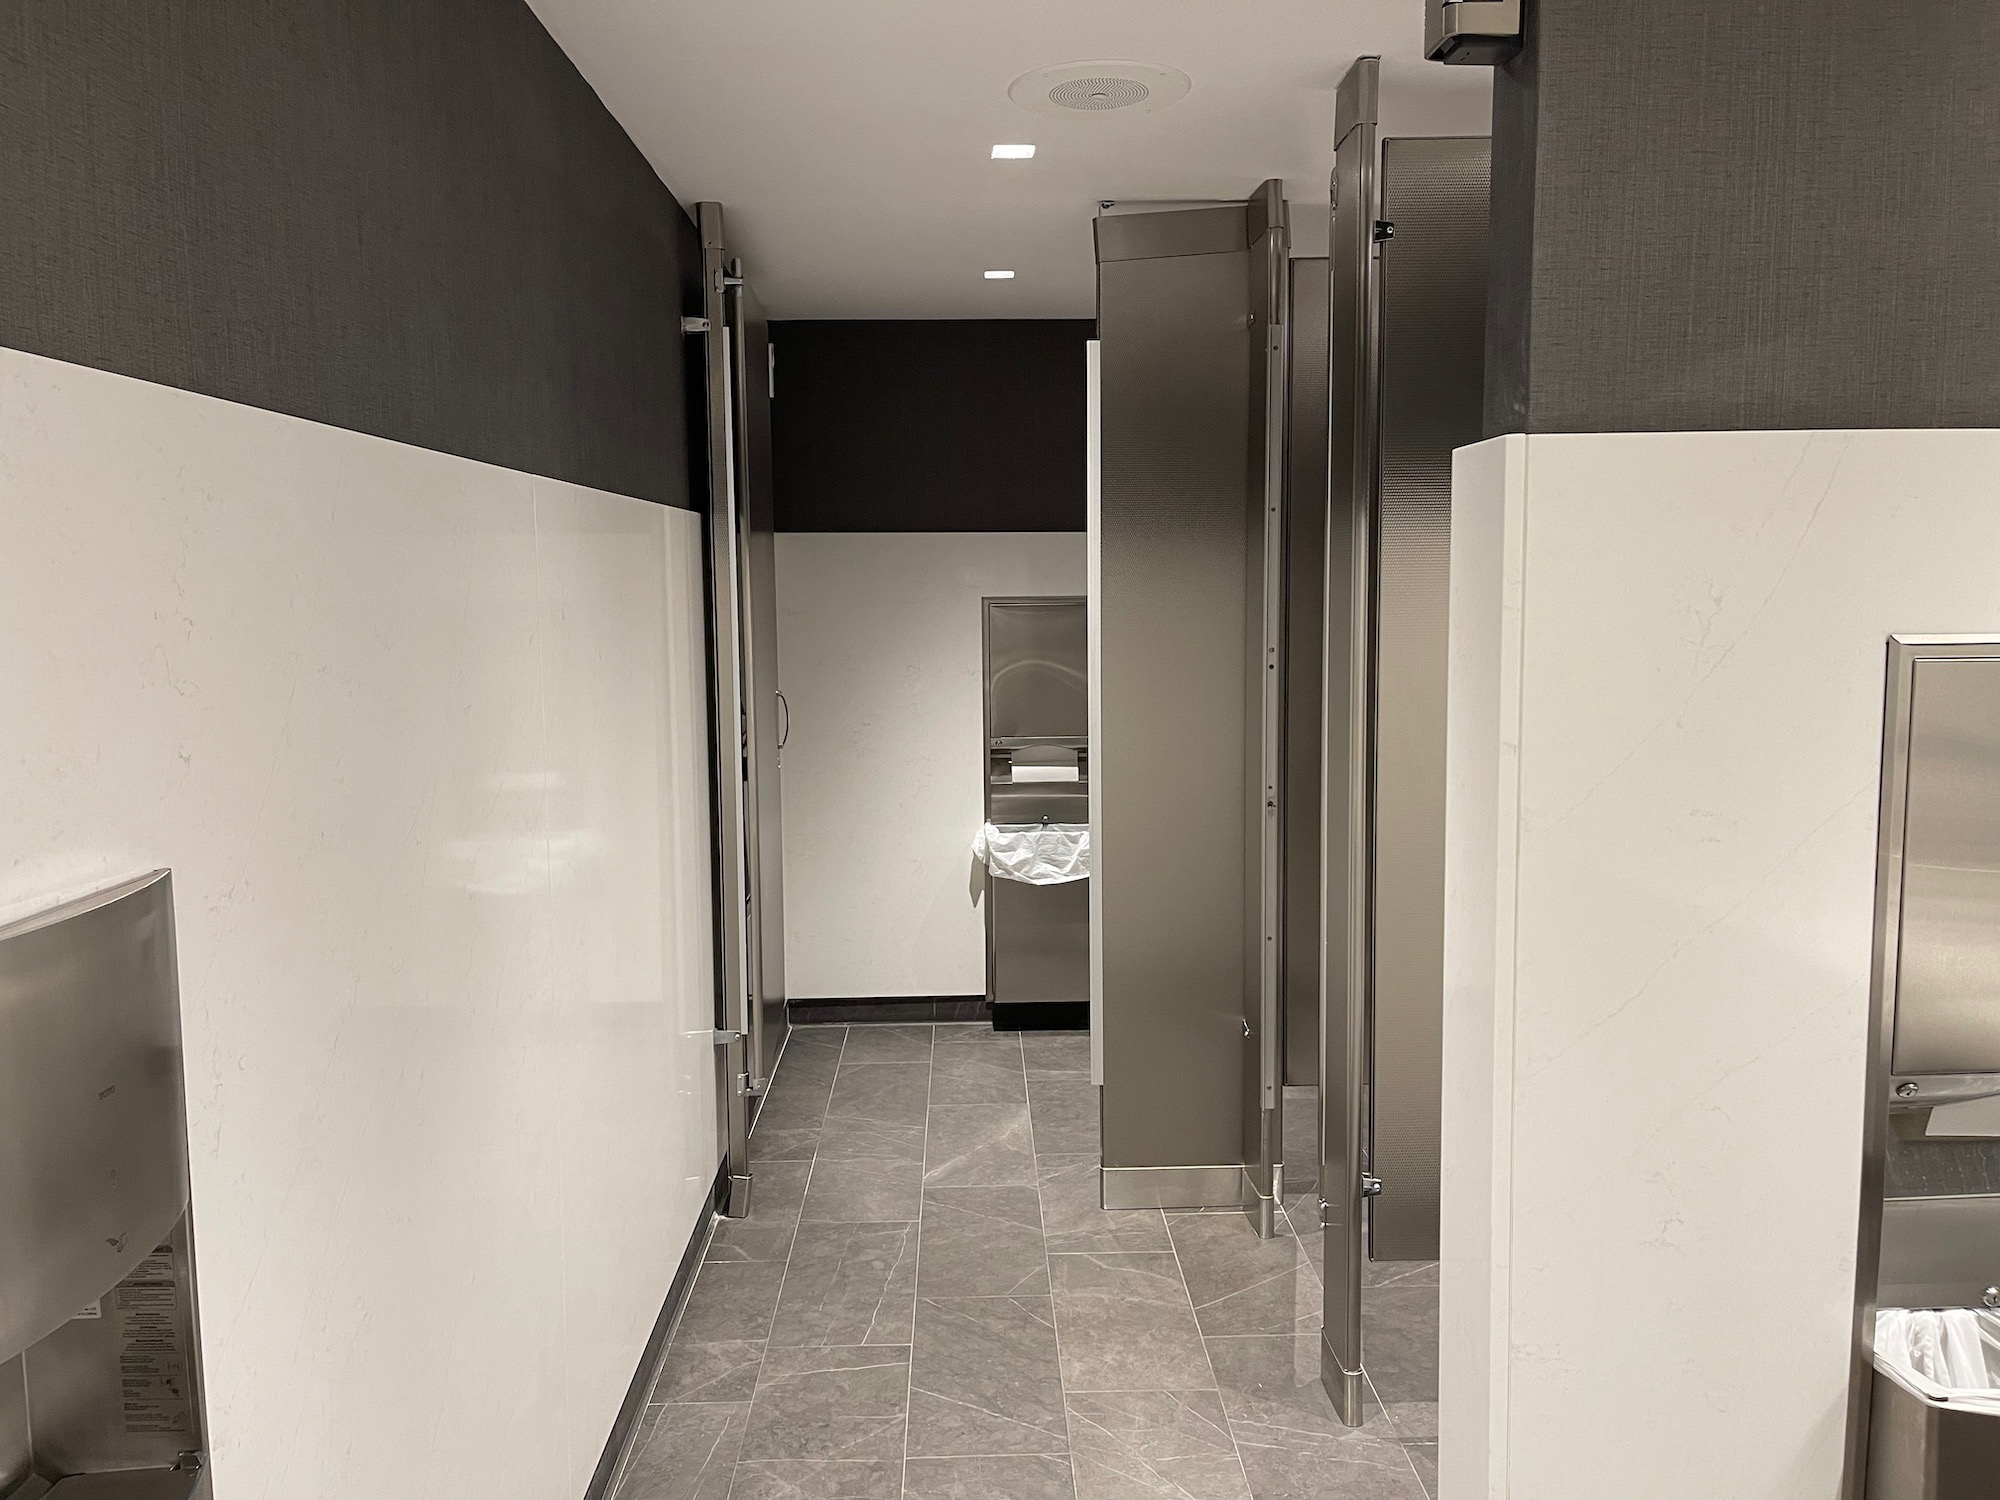 a bathroom with stainless steel doors